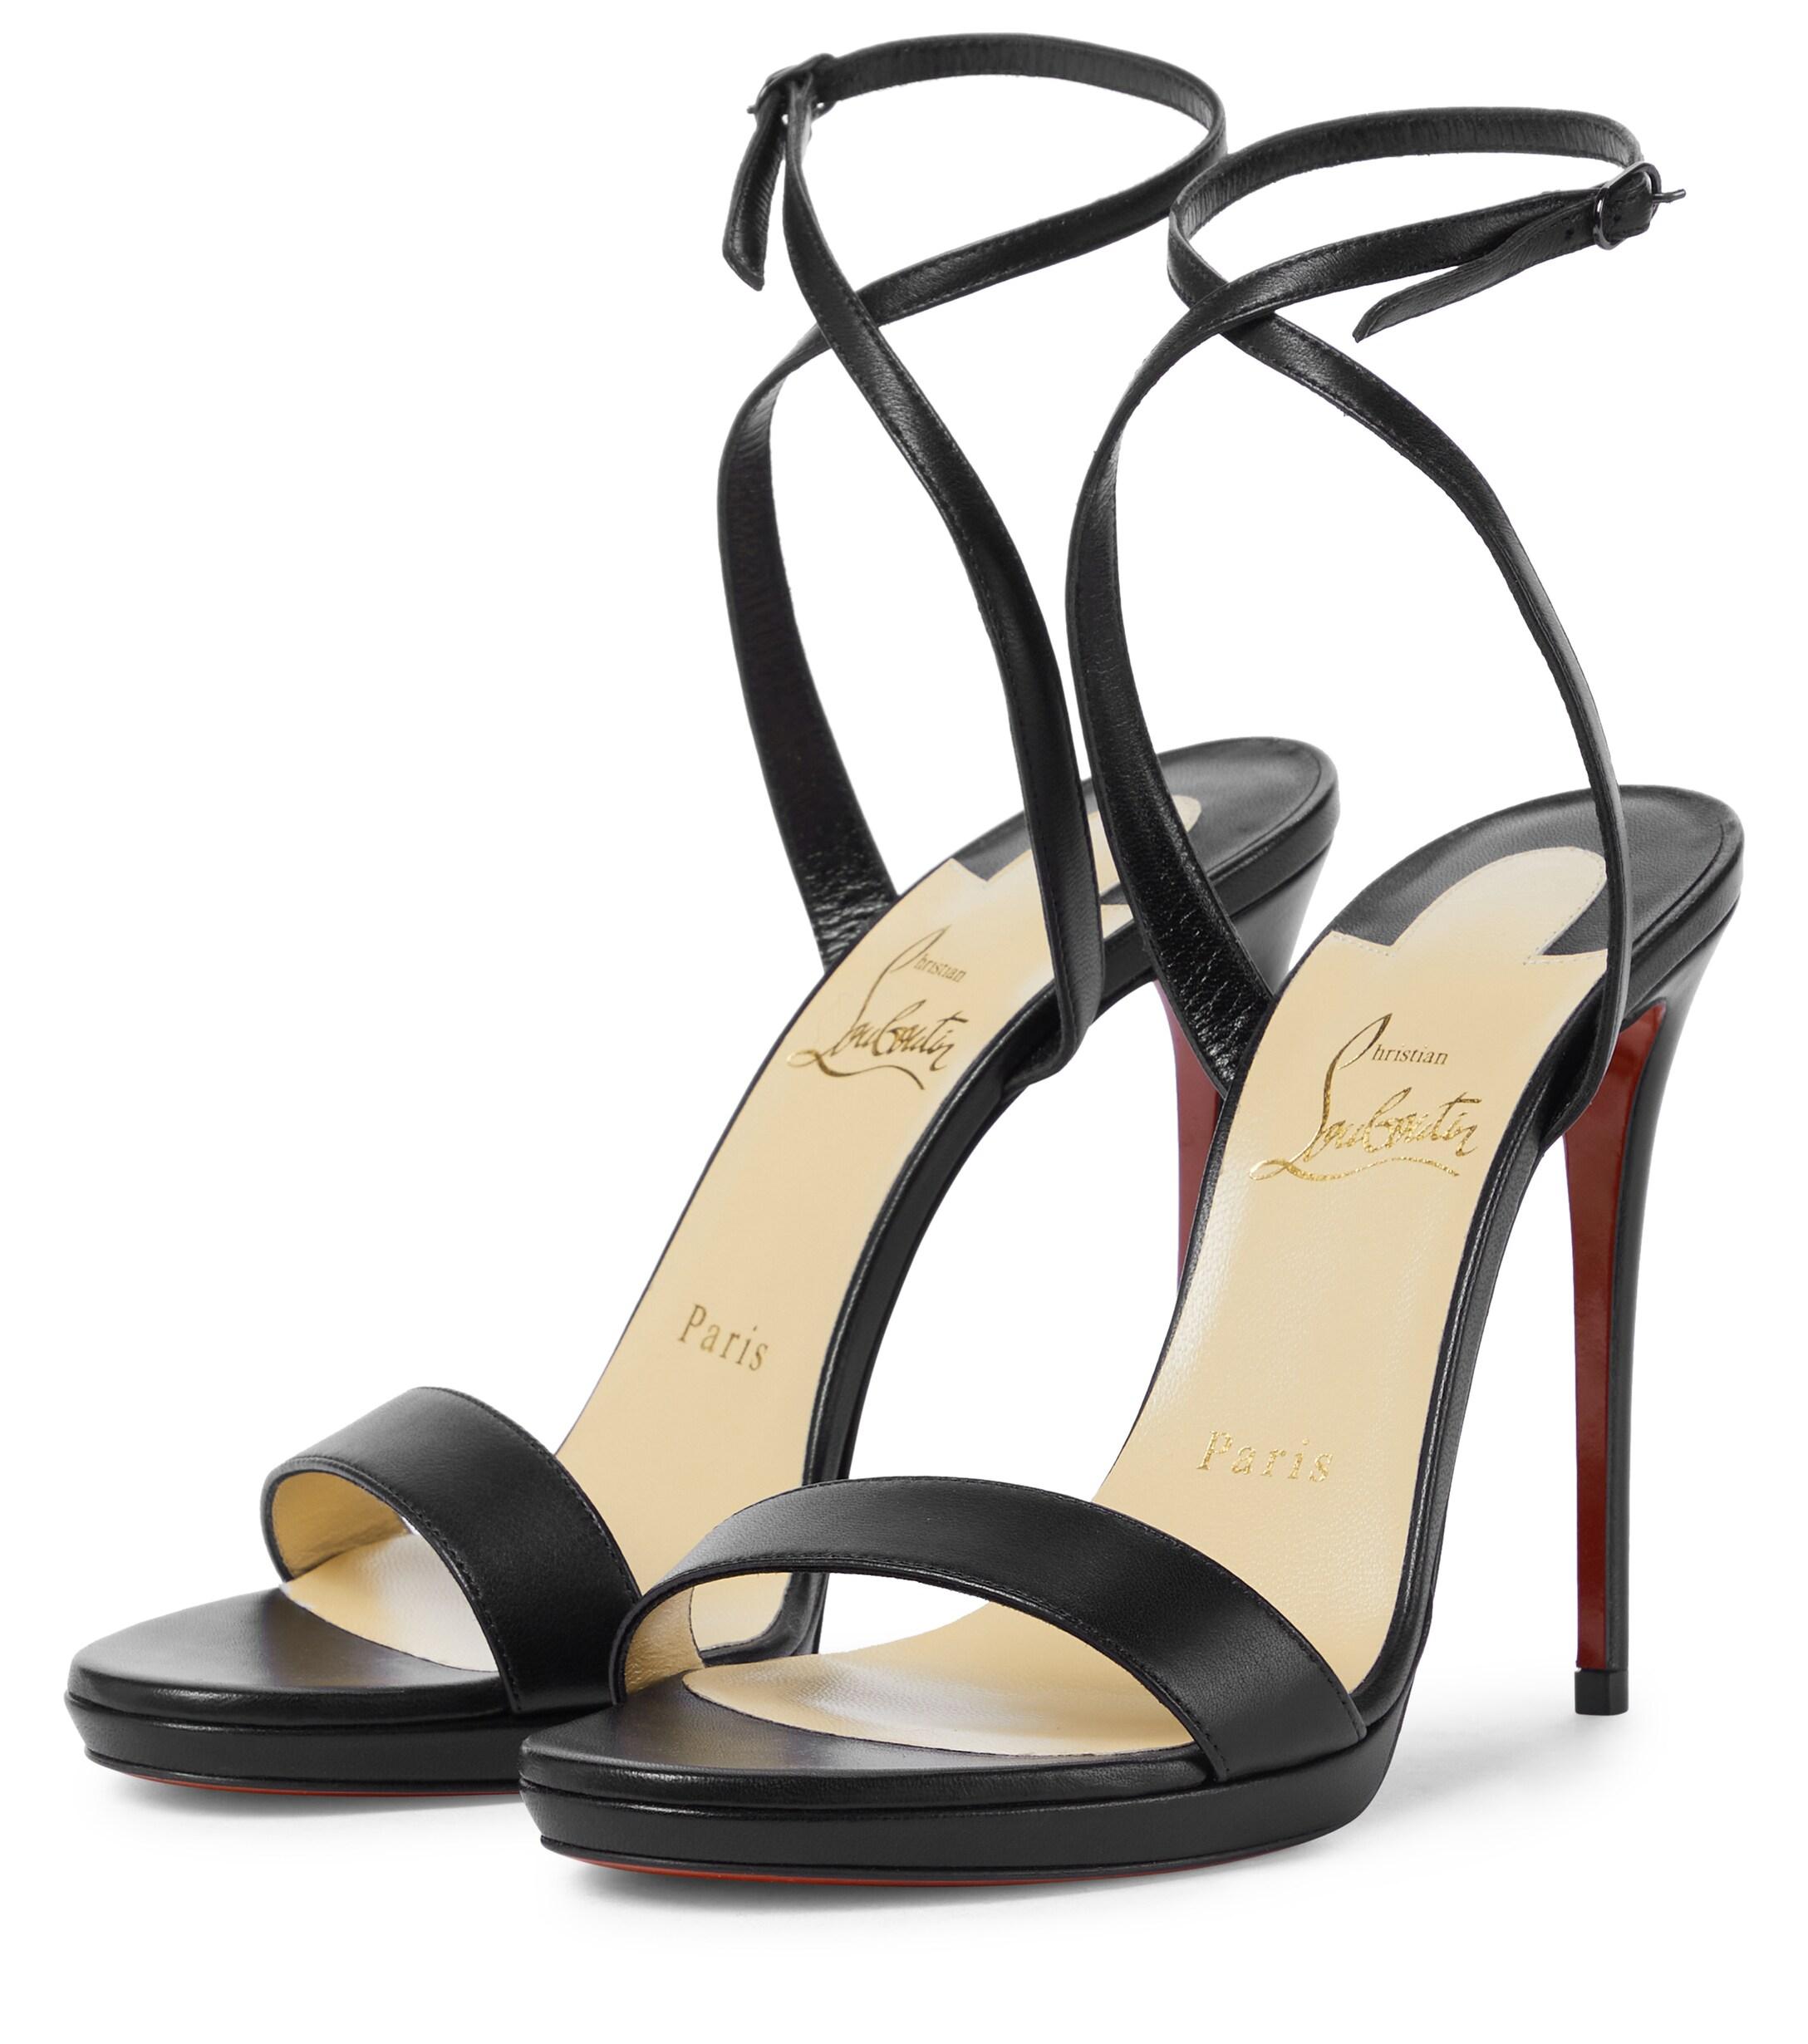 Christian Louboutin Loubi Queen 120 Leather Sandals in Black - Lyst